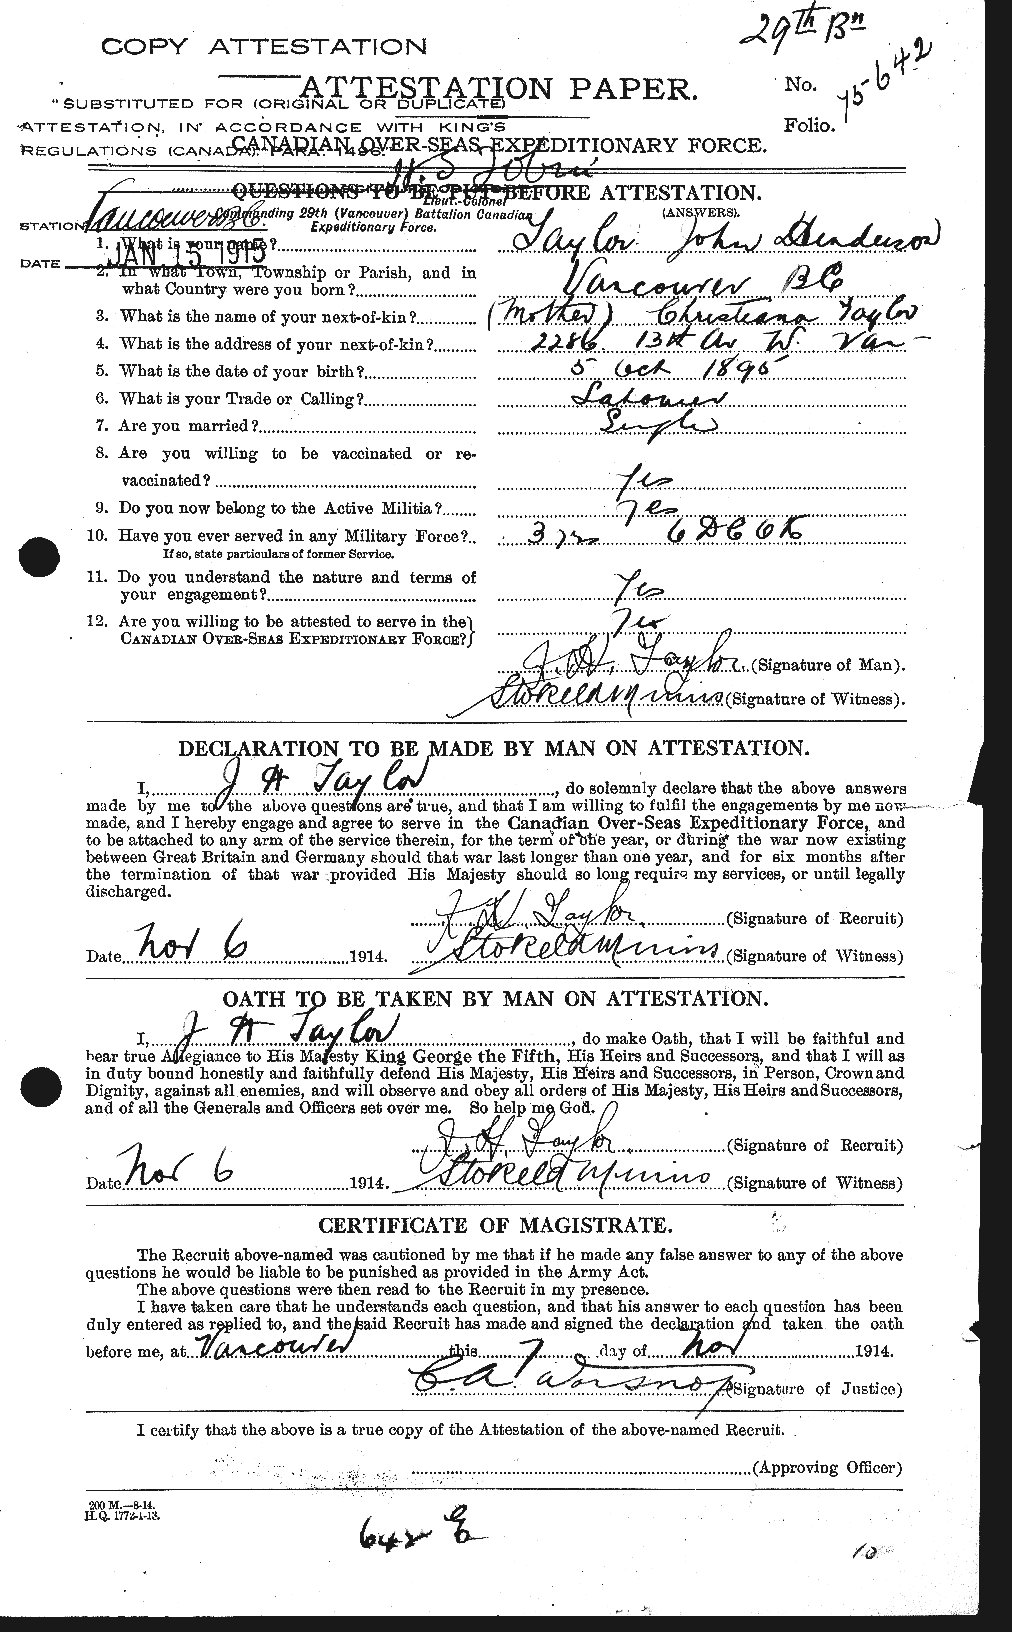 Personnel Records of the First World War - CEF 627109a